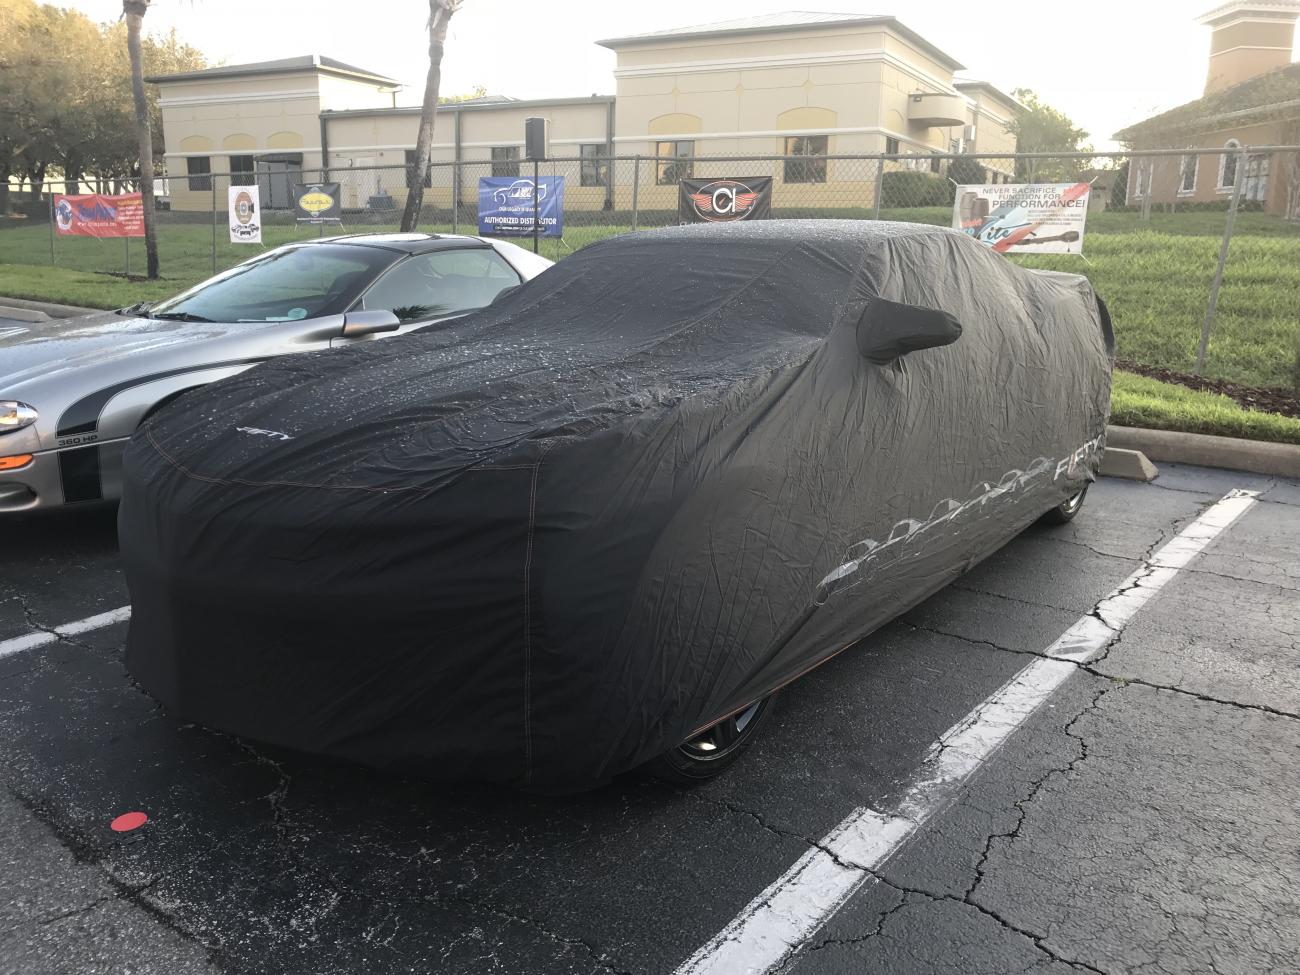 Outdoor * Car covers